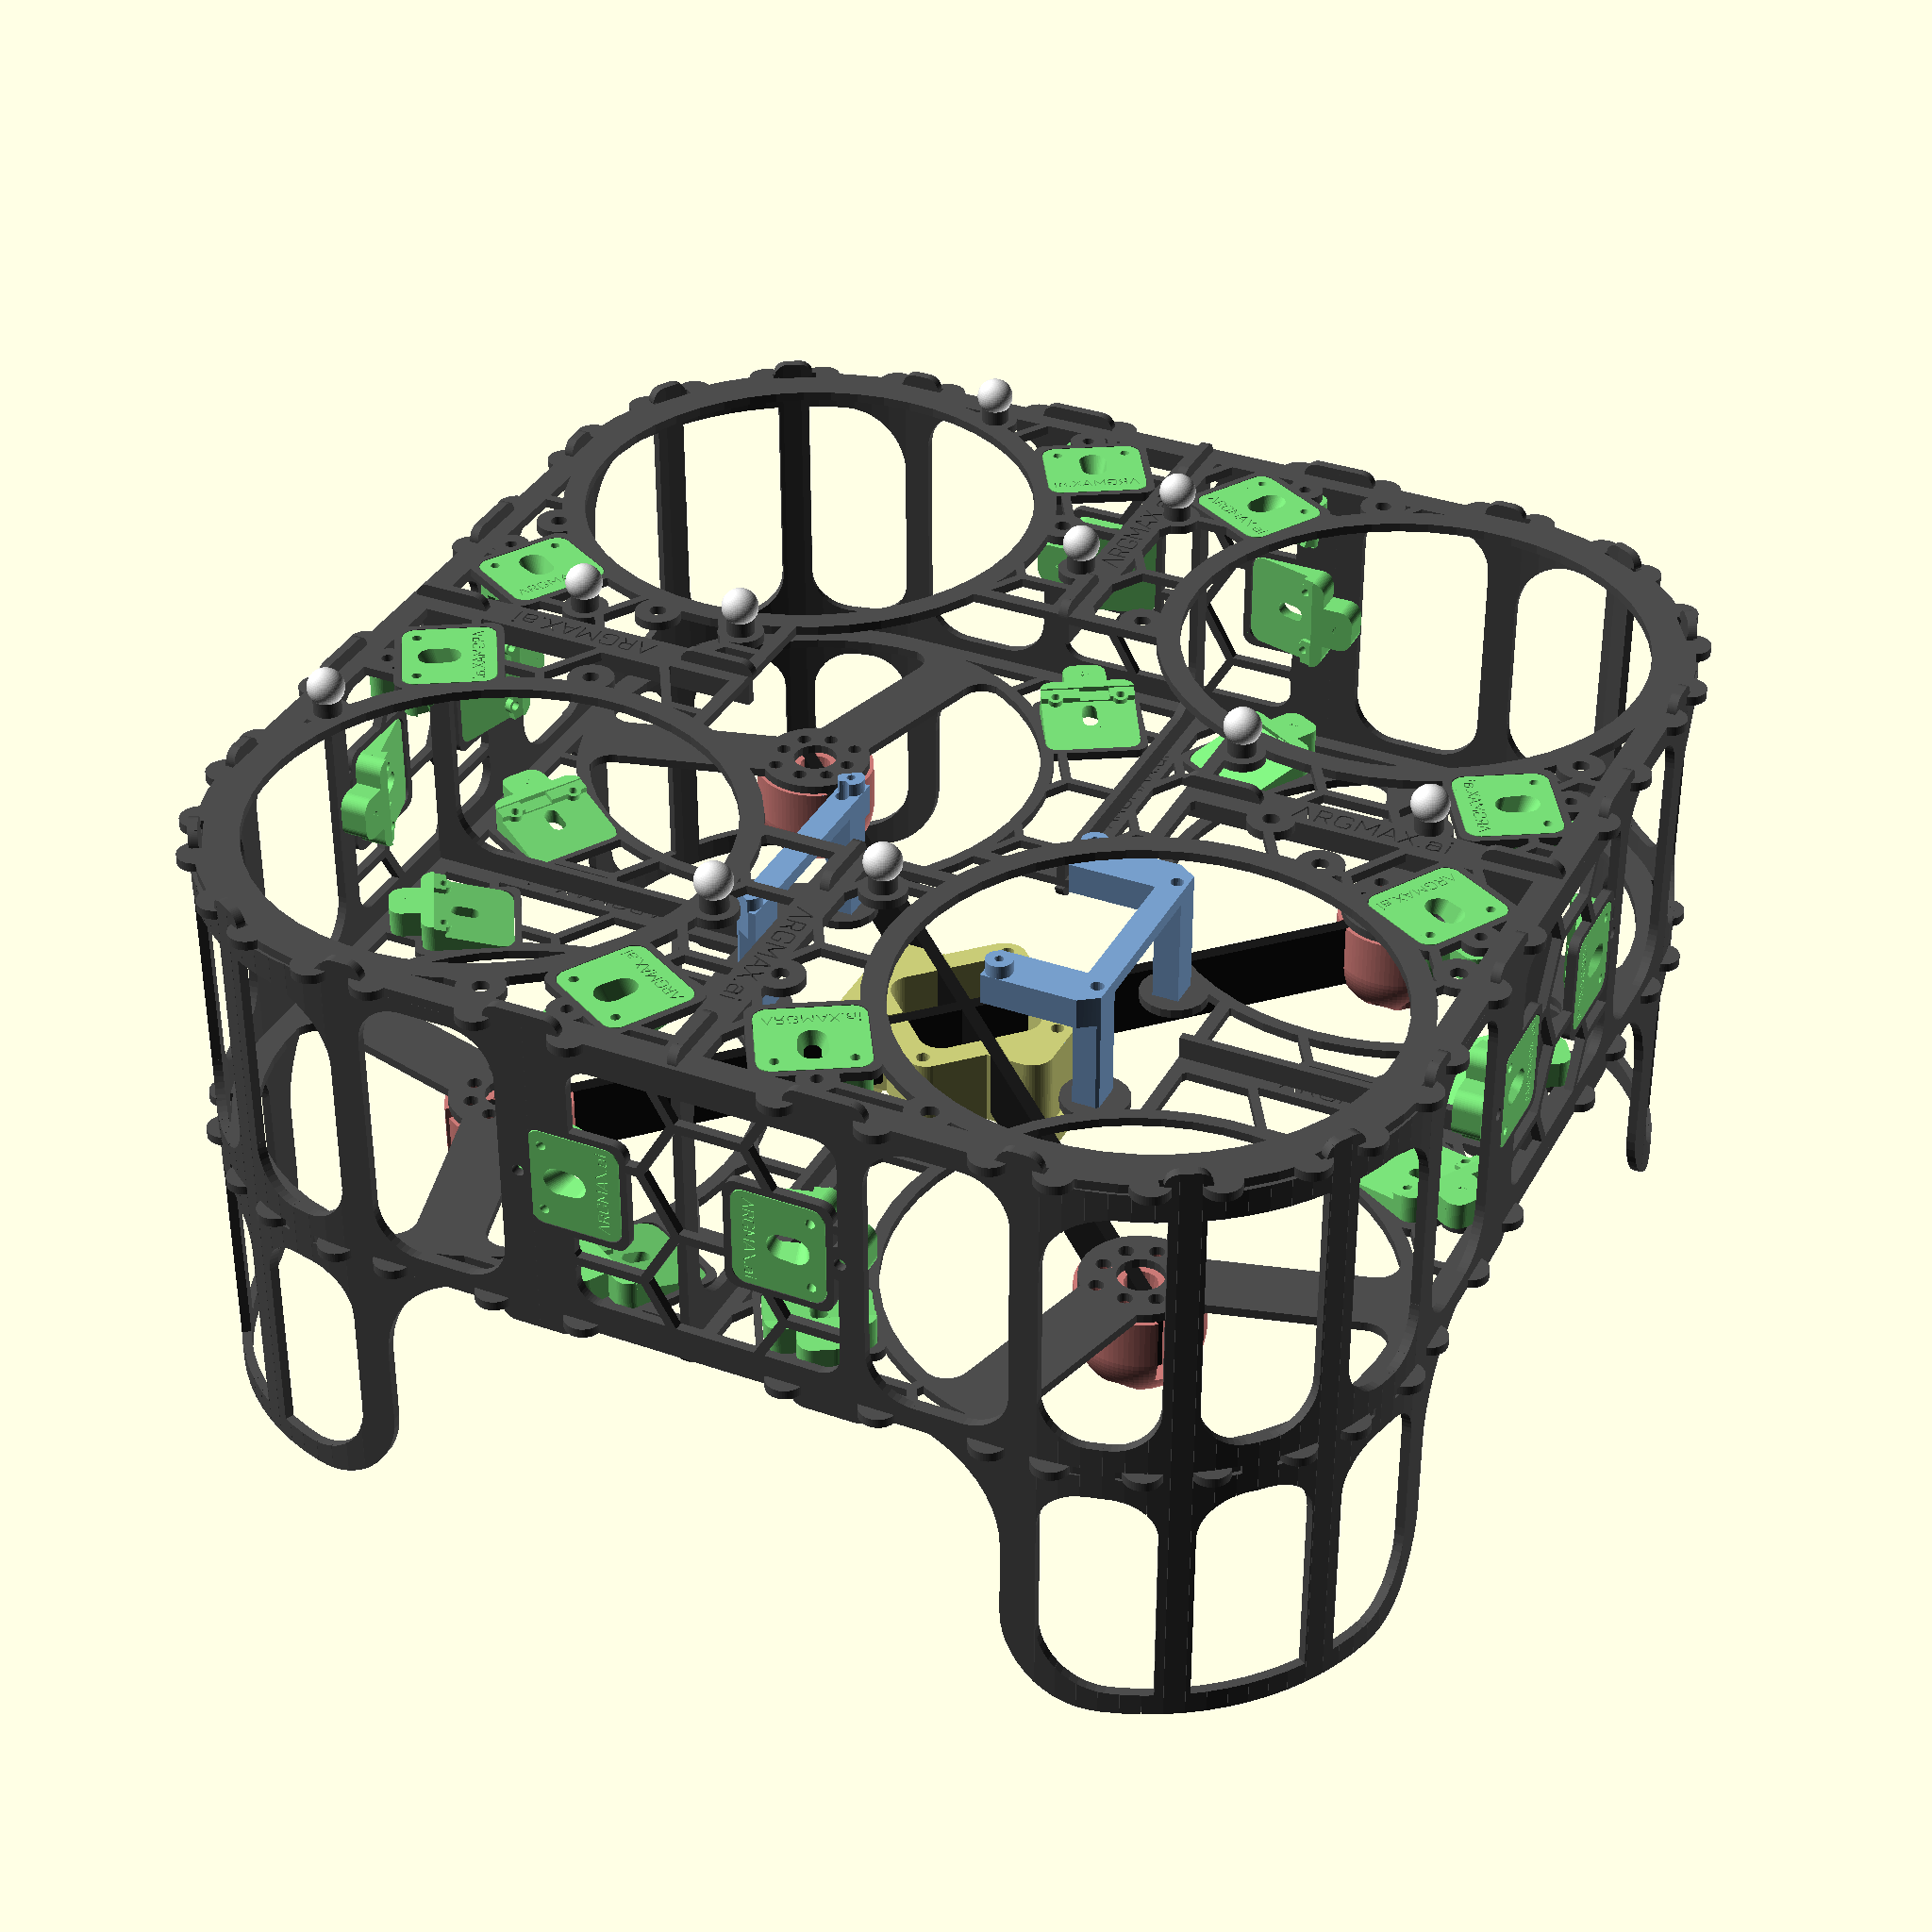 Quadrotor frame with printed parts